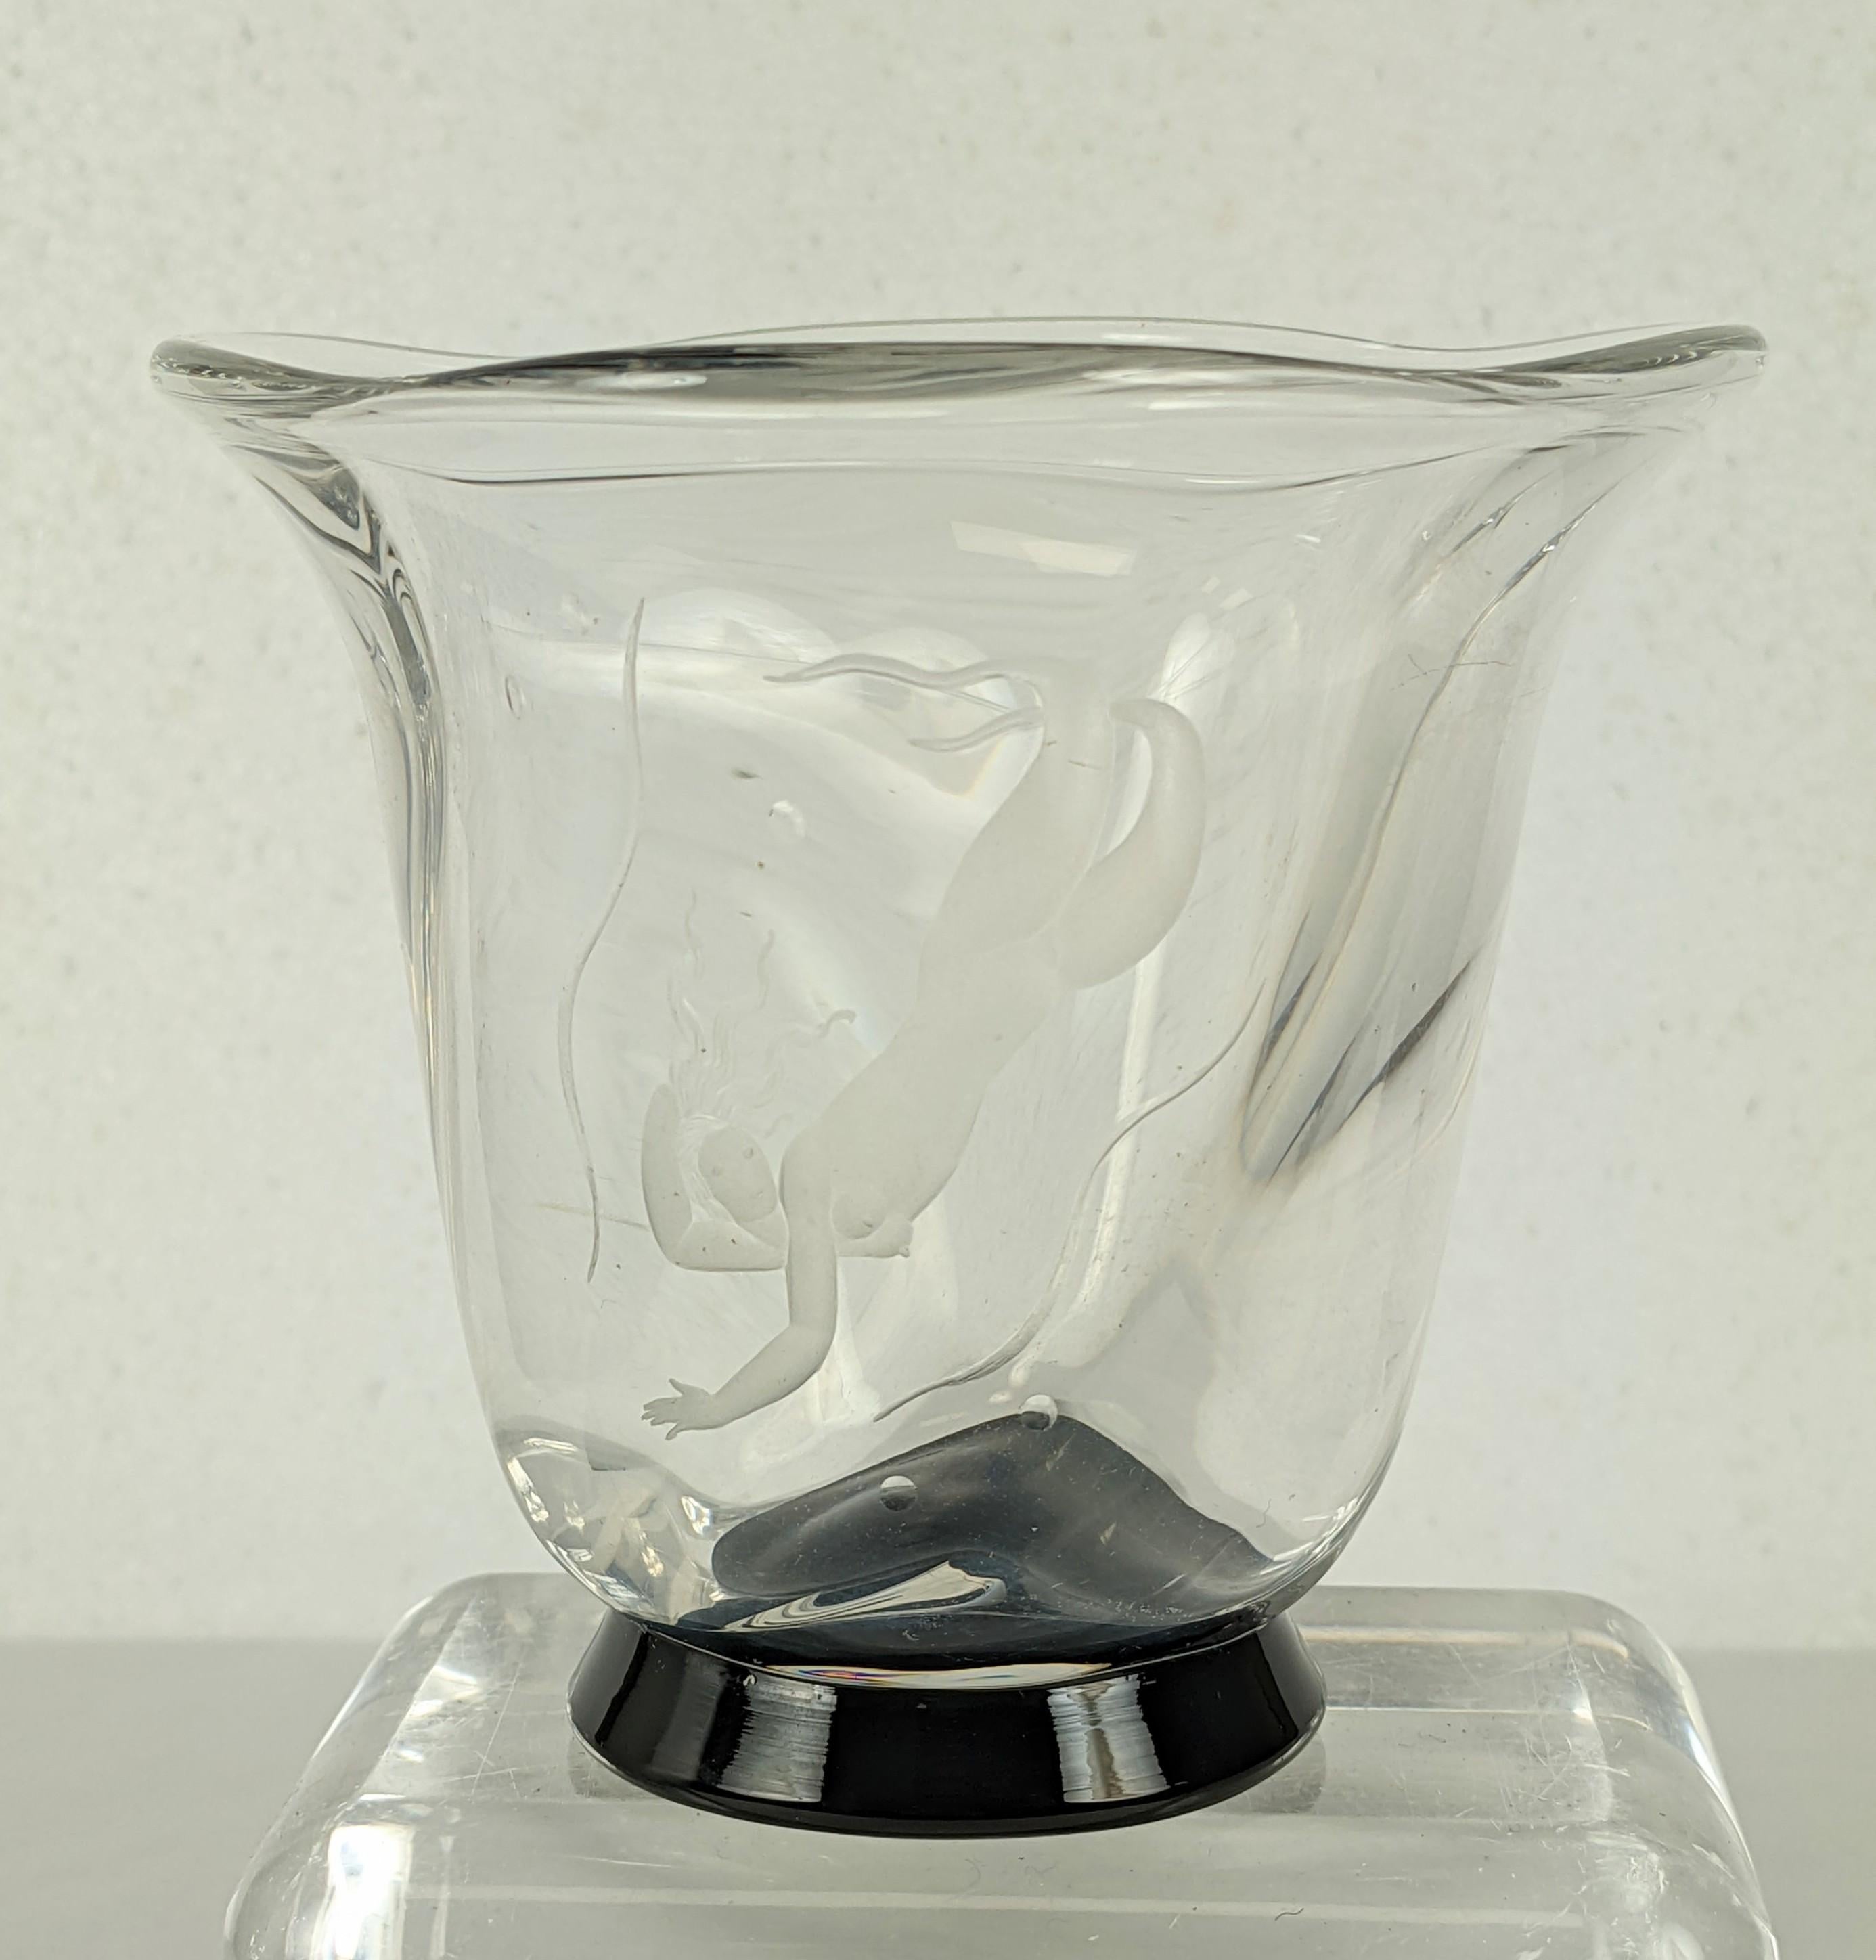 A lovely and charming example of Vicke Lindstrand's elegant, stylized figures on glass, made for the Orrefors glass company in Sweden. This Art Deco vase features an engraved mermaid diving downward into the bubbles. 
The thick glass vase is gently